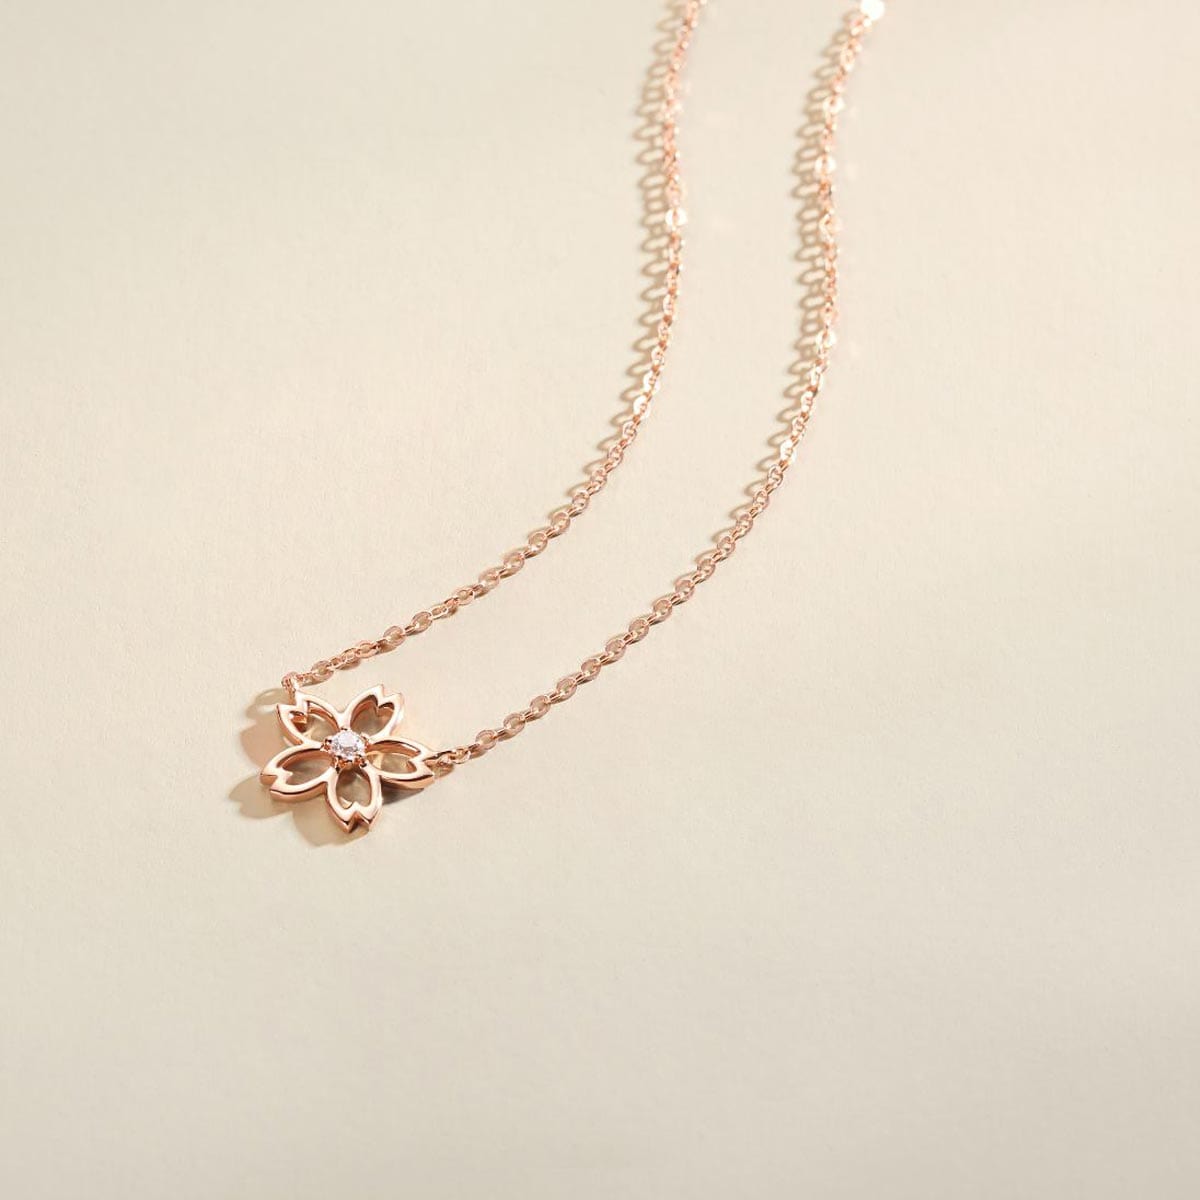 FANCIME "Lia" Cute Cherry Blossom Flower 14K Rose Gold Necklace Detail